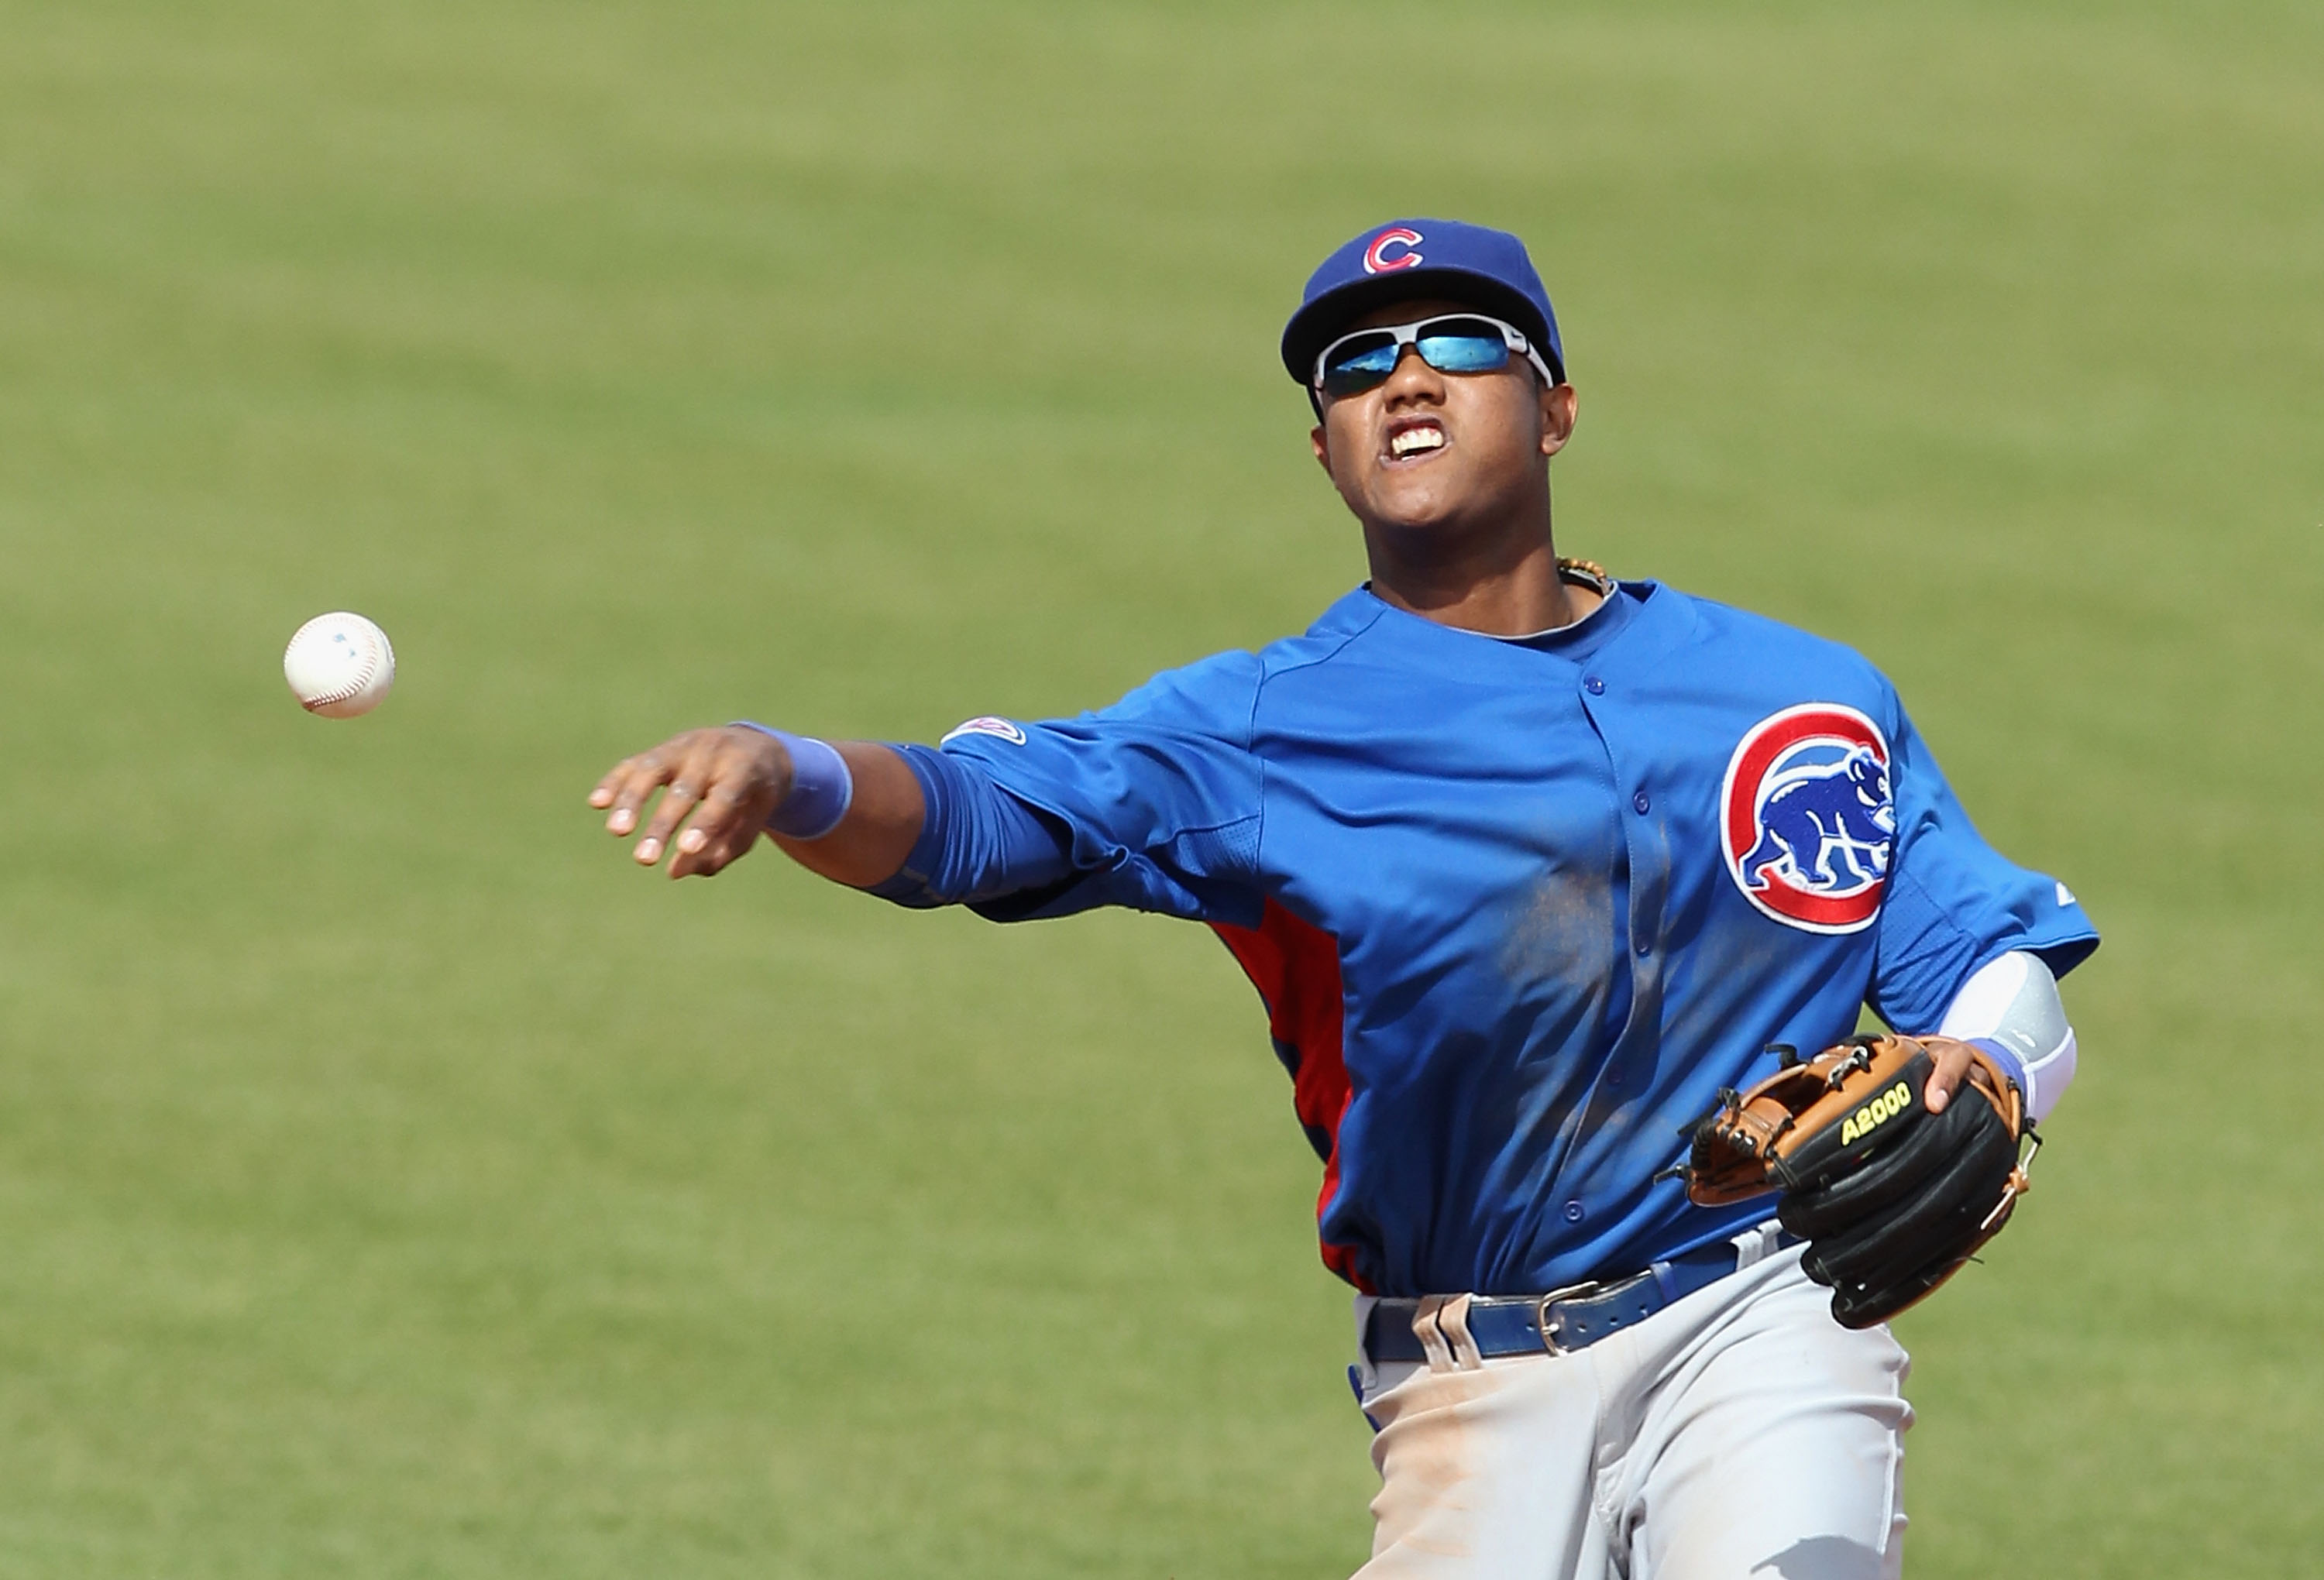 SCOTTSDALE, AZ - MARCH 01:  Infielder Starlin Castro #13 of the Chicago Cubs throws to first base attempting to turn a double play during the spring training game against the San Francisco Giants at Scottsdale Stadium on March 1, 2011 in Scottsdale, Arizo